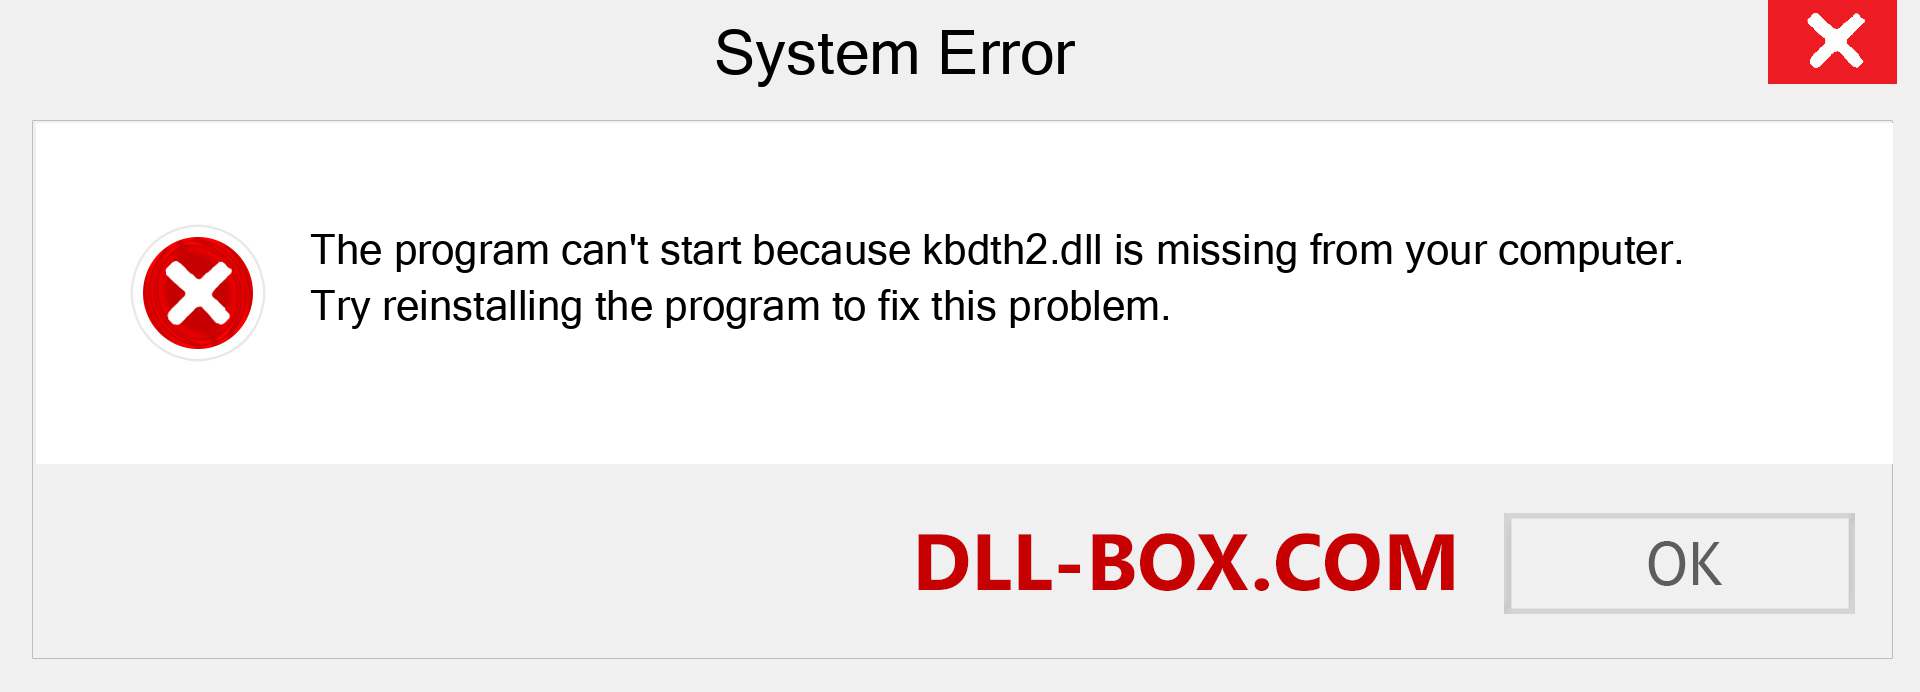  kbdth2.dll file is missing?. Download for Windows 7, 8, 10 - Fix  kbdth2 dll Missing Error on Windows, photos, images